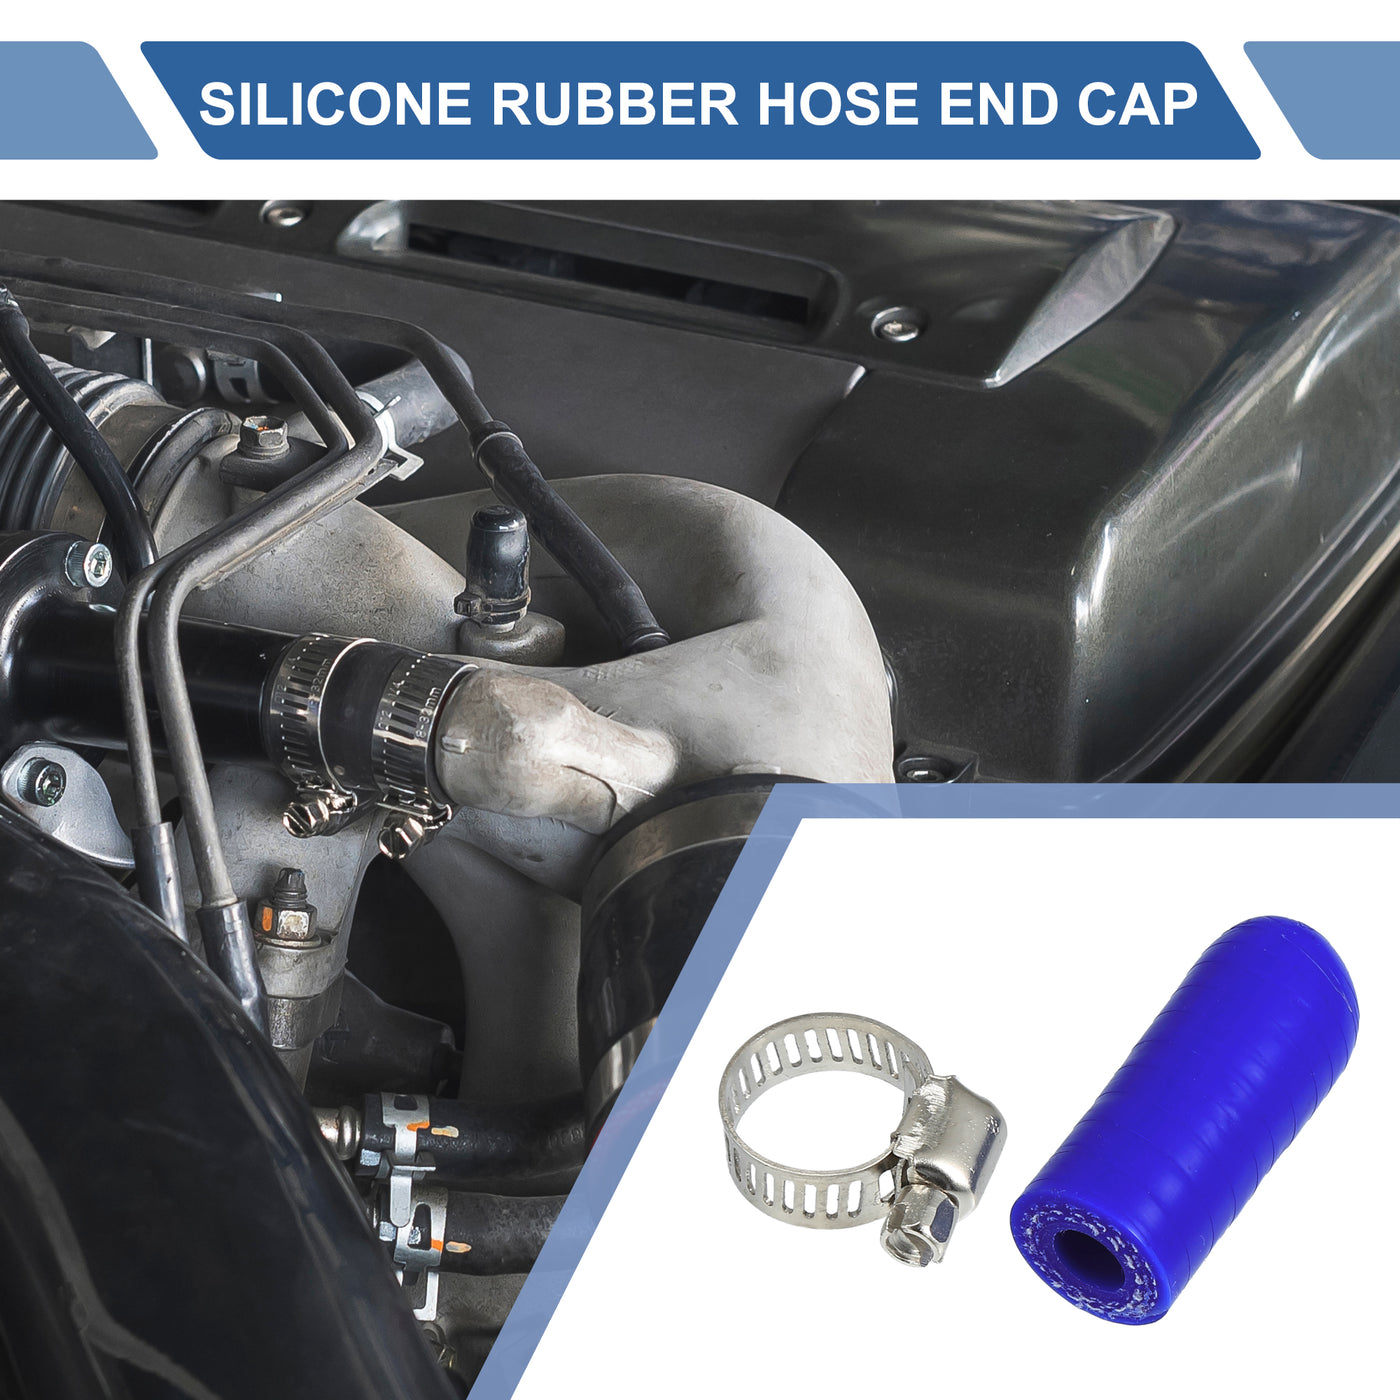 X AUTOHAUX 1 Set 30mm Length 8mm/0.31" ID Blue Car Silicone Rubber Hose End Cap with Clamps Silicone Reinforced Blanking Cap for Bypass Tube Universal